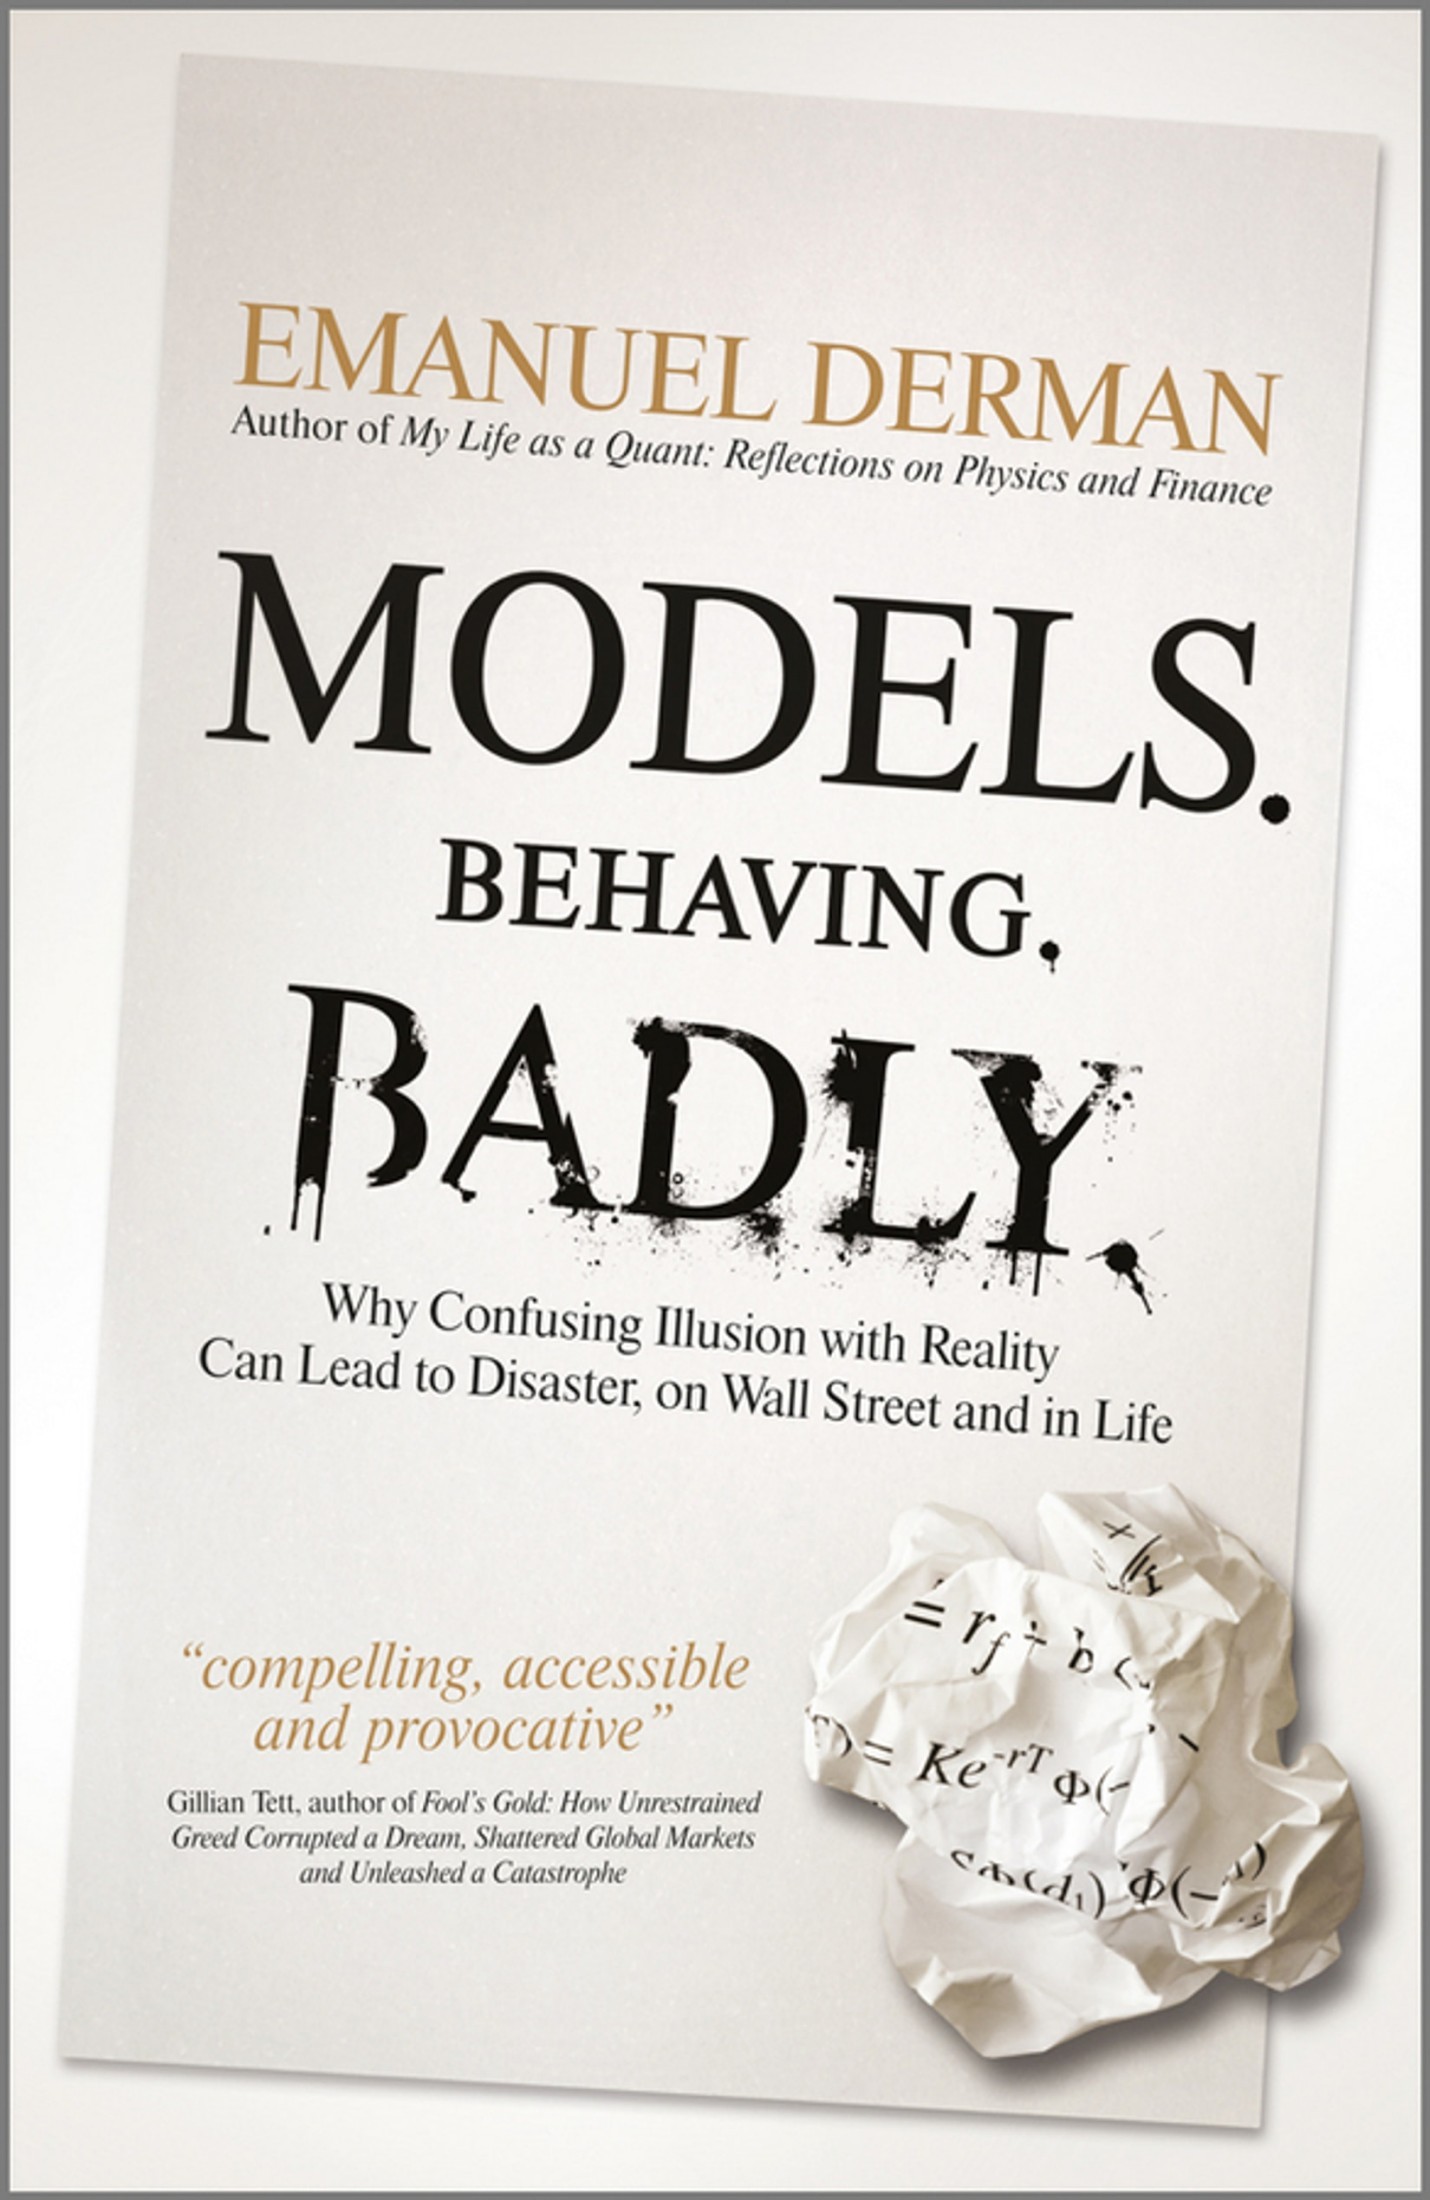 Models Behaving Badly: How Confusing Illusion with Reality Can Lead to Disaster, on Wall Street and in Life